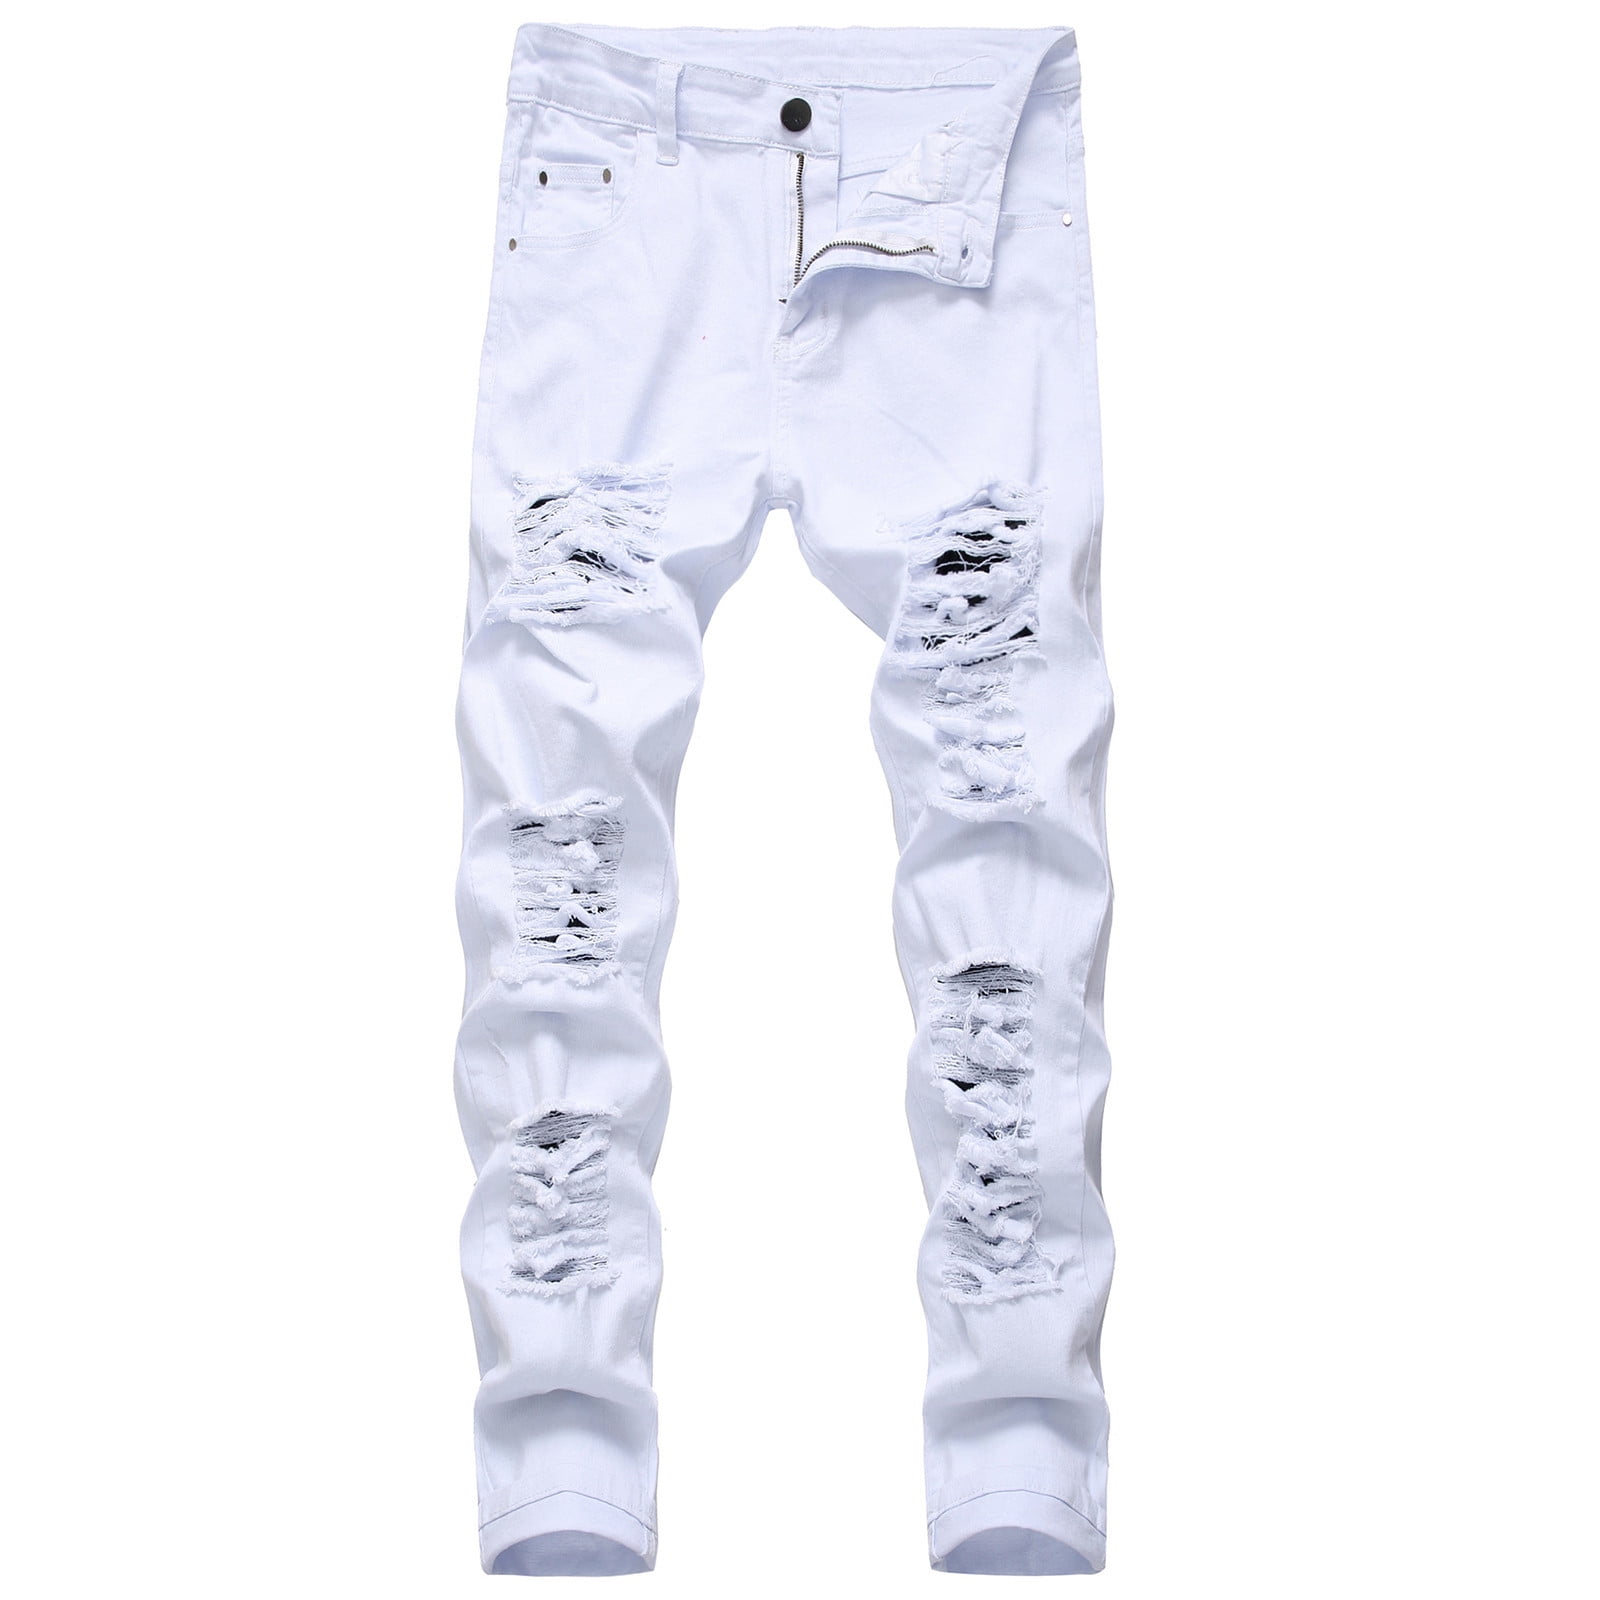 Entyinea Ripped Jeans for Men Skinny Stretch Washed Slim Fit Jeans ...